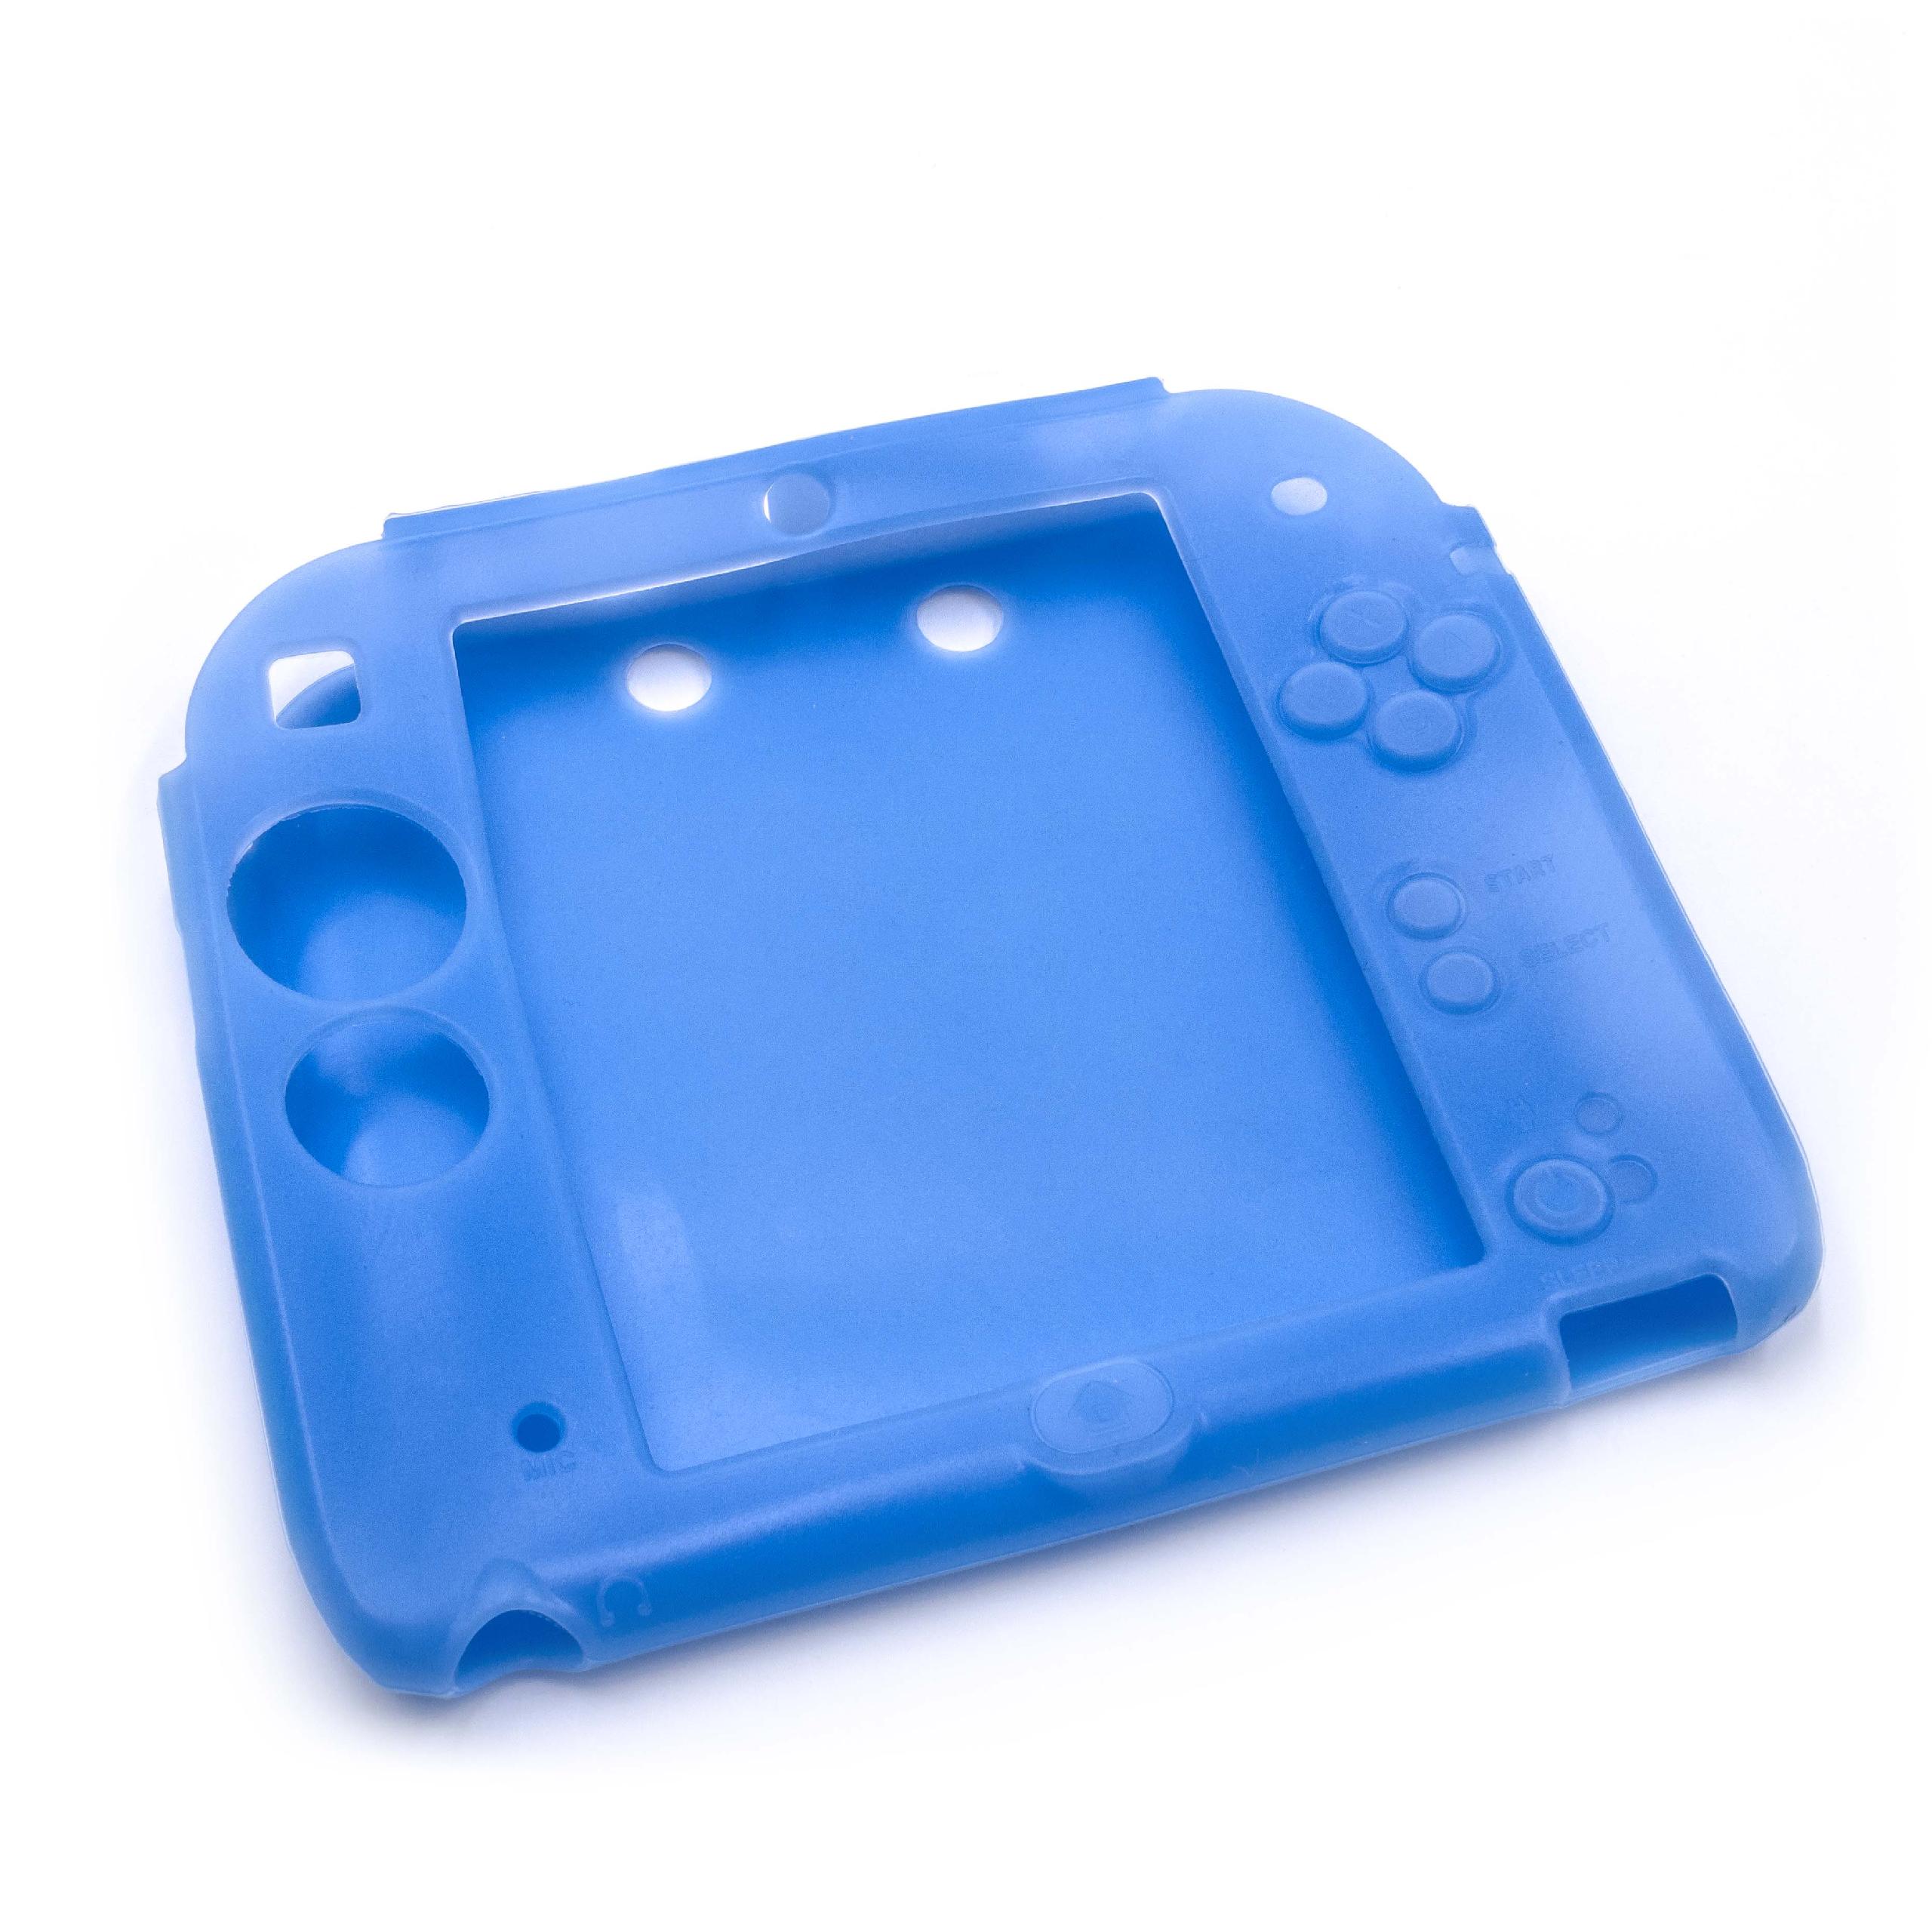 Cover suitable for Nintendo 2DS Gaming Console - Case, Silicone, Blue